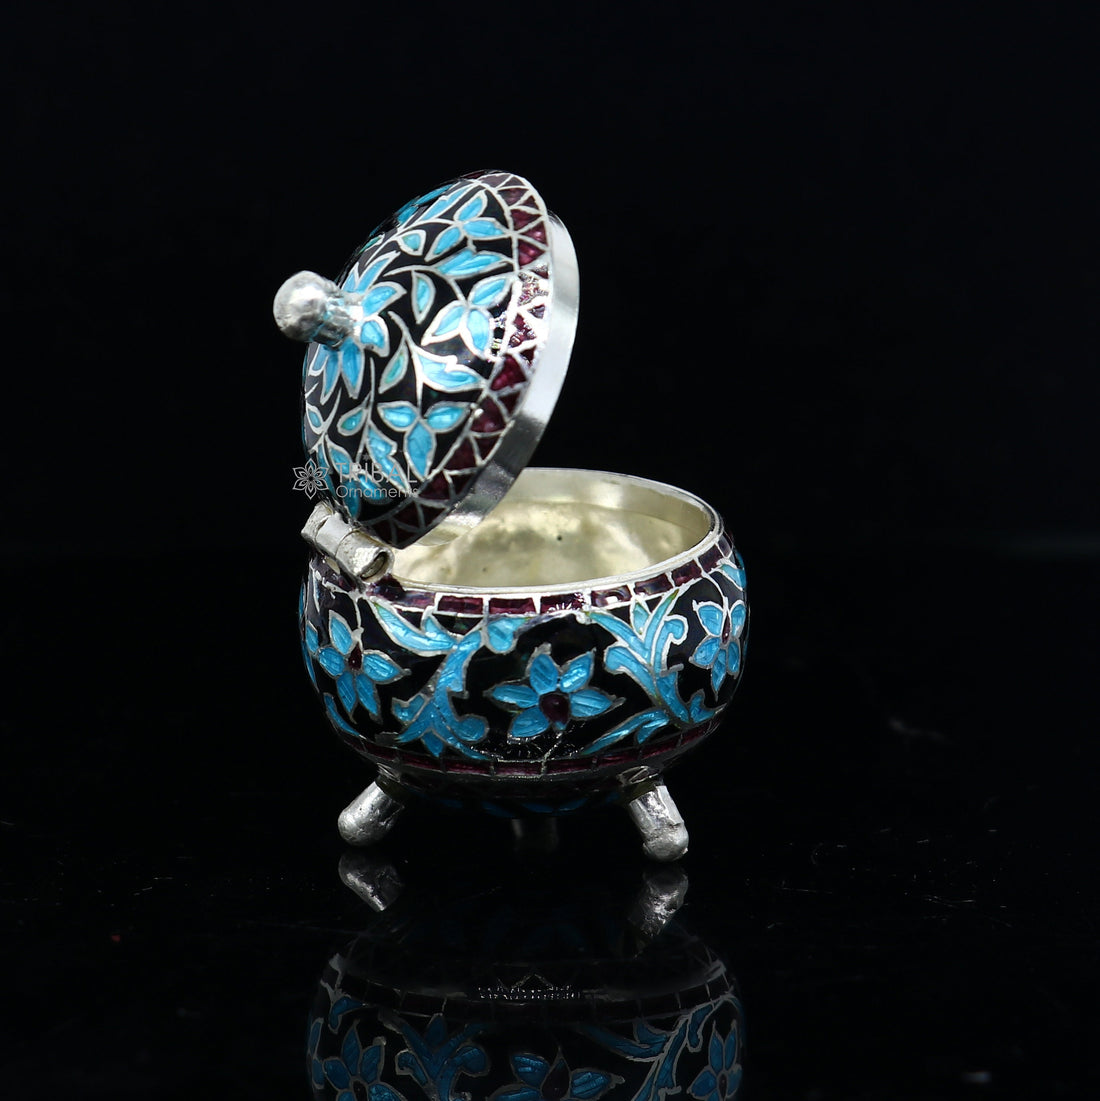 925 Sterling silver handmade fabulous trinket box, Silver container box, casket box, sindoor box, enamel work customized gifting box stb834 - TRIBAL ORNAMENTS